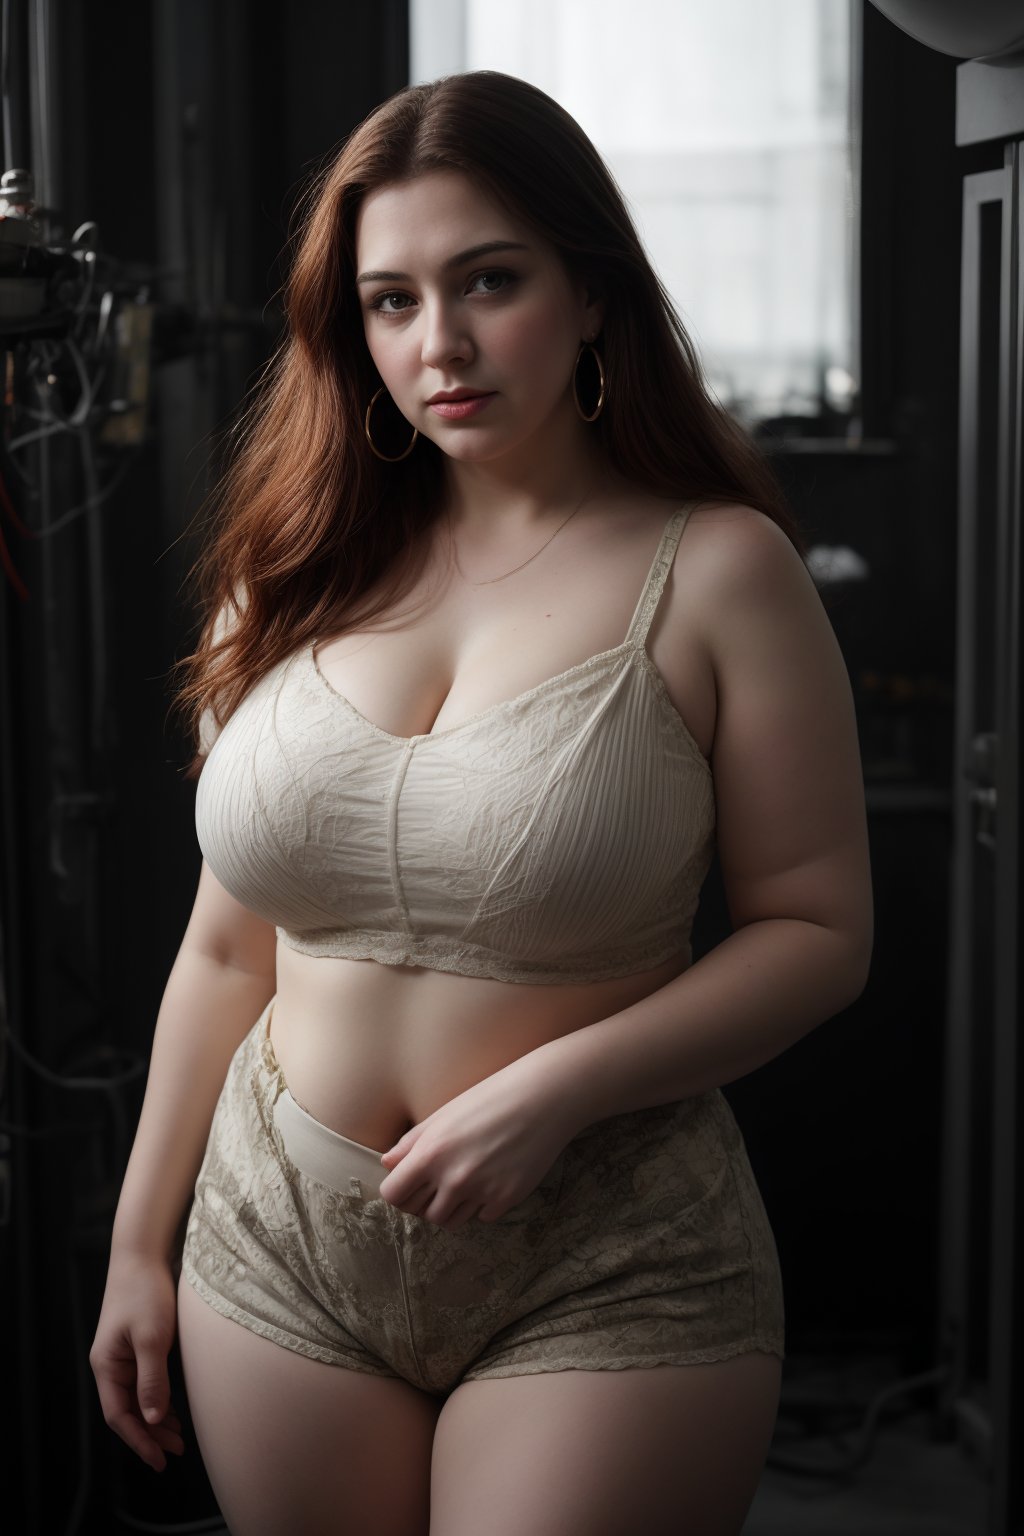 Bra:2, t shirt, Tanktop, plump, Cyberpunk, Neon glow, curvy women:2, milf ,  bubbly, masterpiece, high resolution,  long gown, best quality, 4k, plump face, 38 years old , panty house , strap on, women, shorts,  hot pants, thick_hip, solo, beauty photo, amateur photo, skin texture:2, 1girl, eye level, and hoop earrings, red_teal_orange-colored busty ironed straight, stand, room,lighting,photorealistic ,CyberpunkWorld, 27 year old,Plump chubby,kushboo